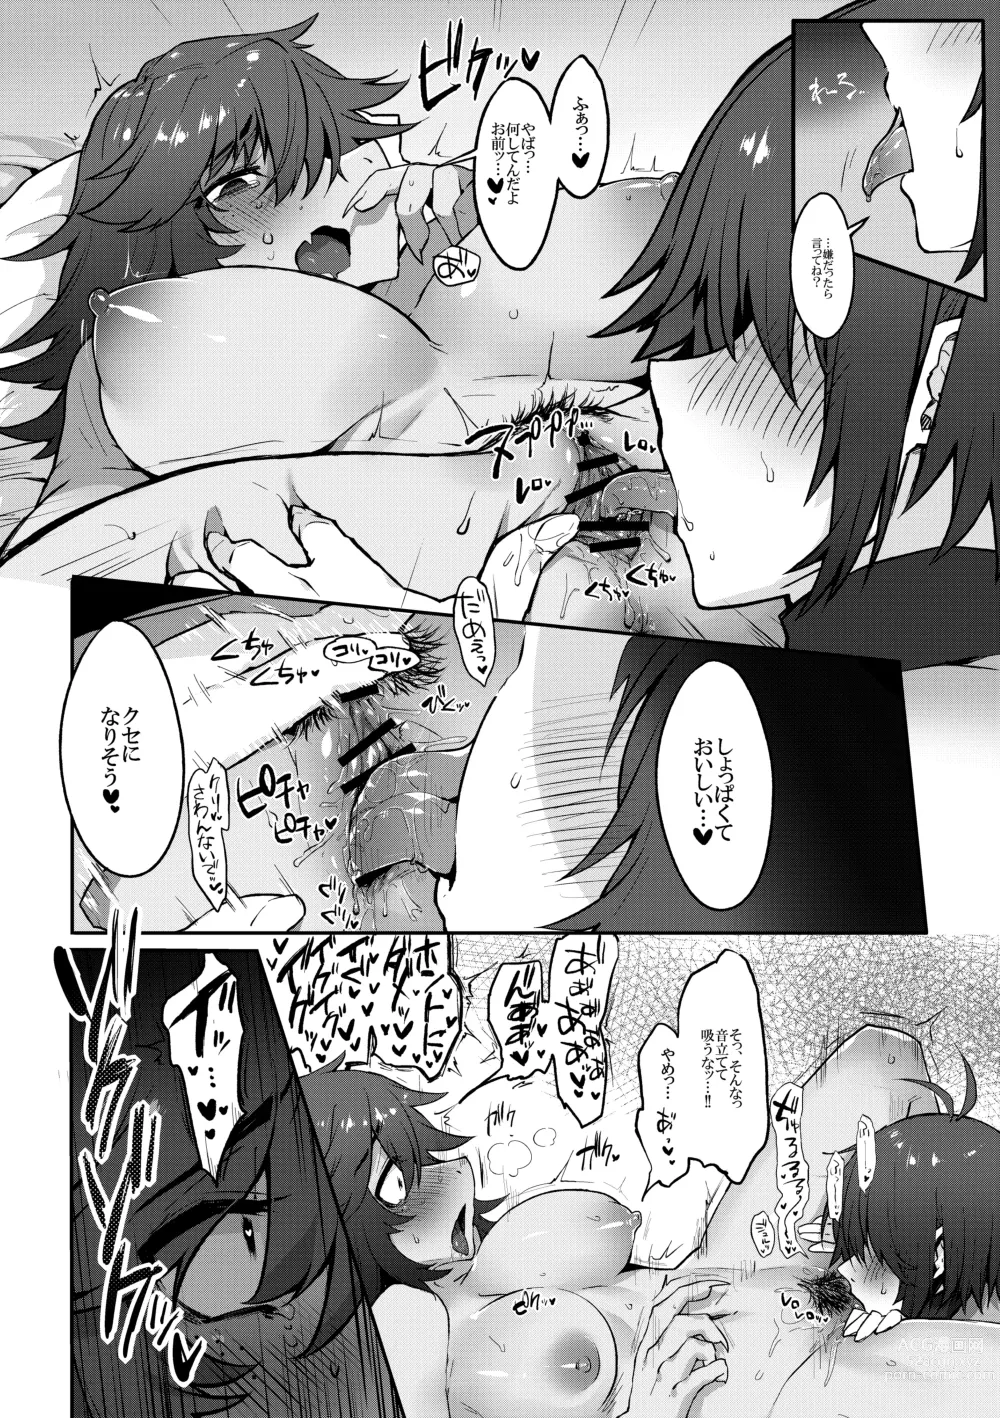 Page 21 of doujinshi Tell Me That You Love Me